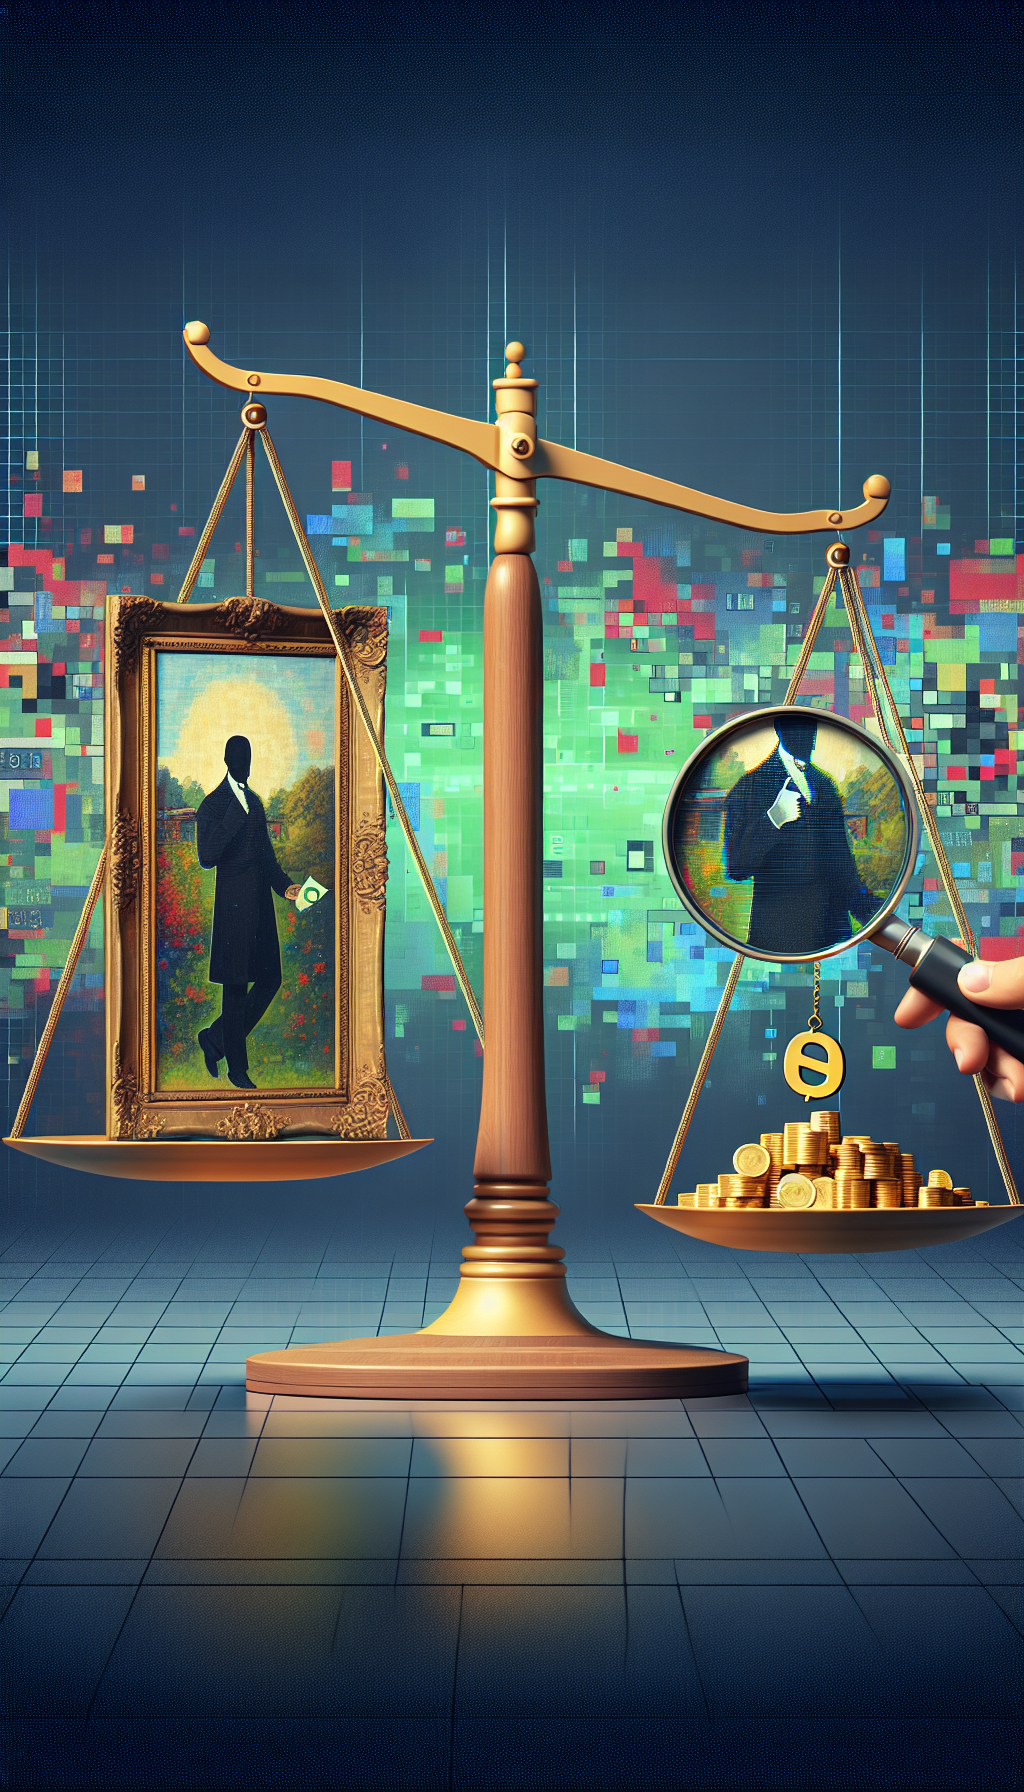 A digital scale balancing a classical painting on one side and a stack of coins on the other, with a magnifying glass focusing on a "0$" price tag dangling from the artwork. The background is a pixelated, abstract representation of an online interface to suggest virtual assessment, while an expert's silhouette with a thumbs-up subtly fades into the digital backdrop.